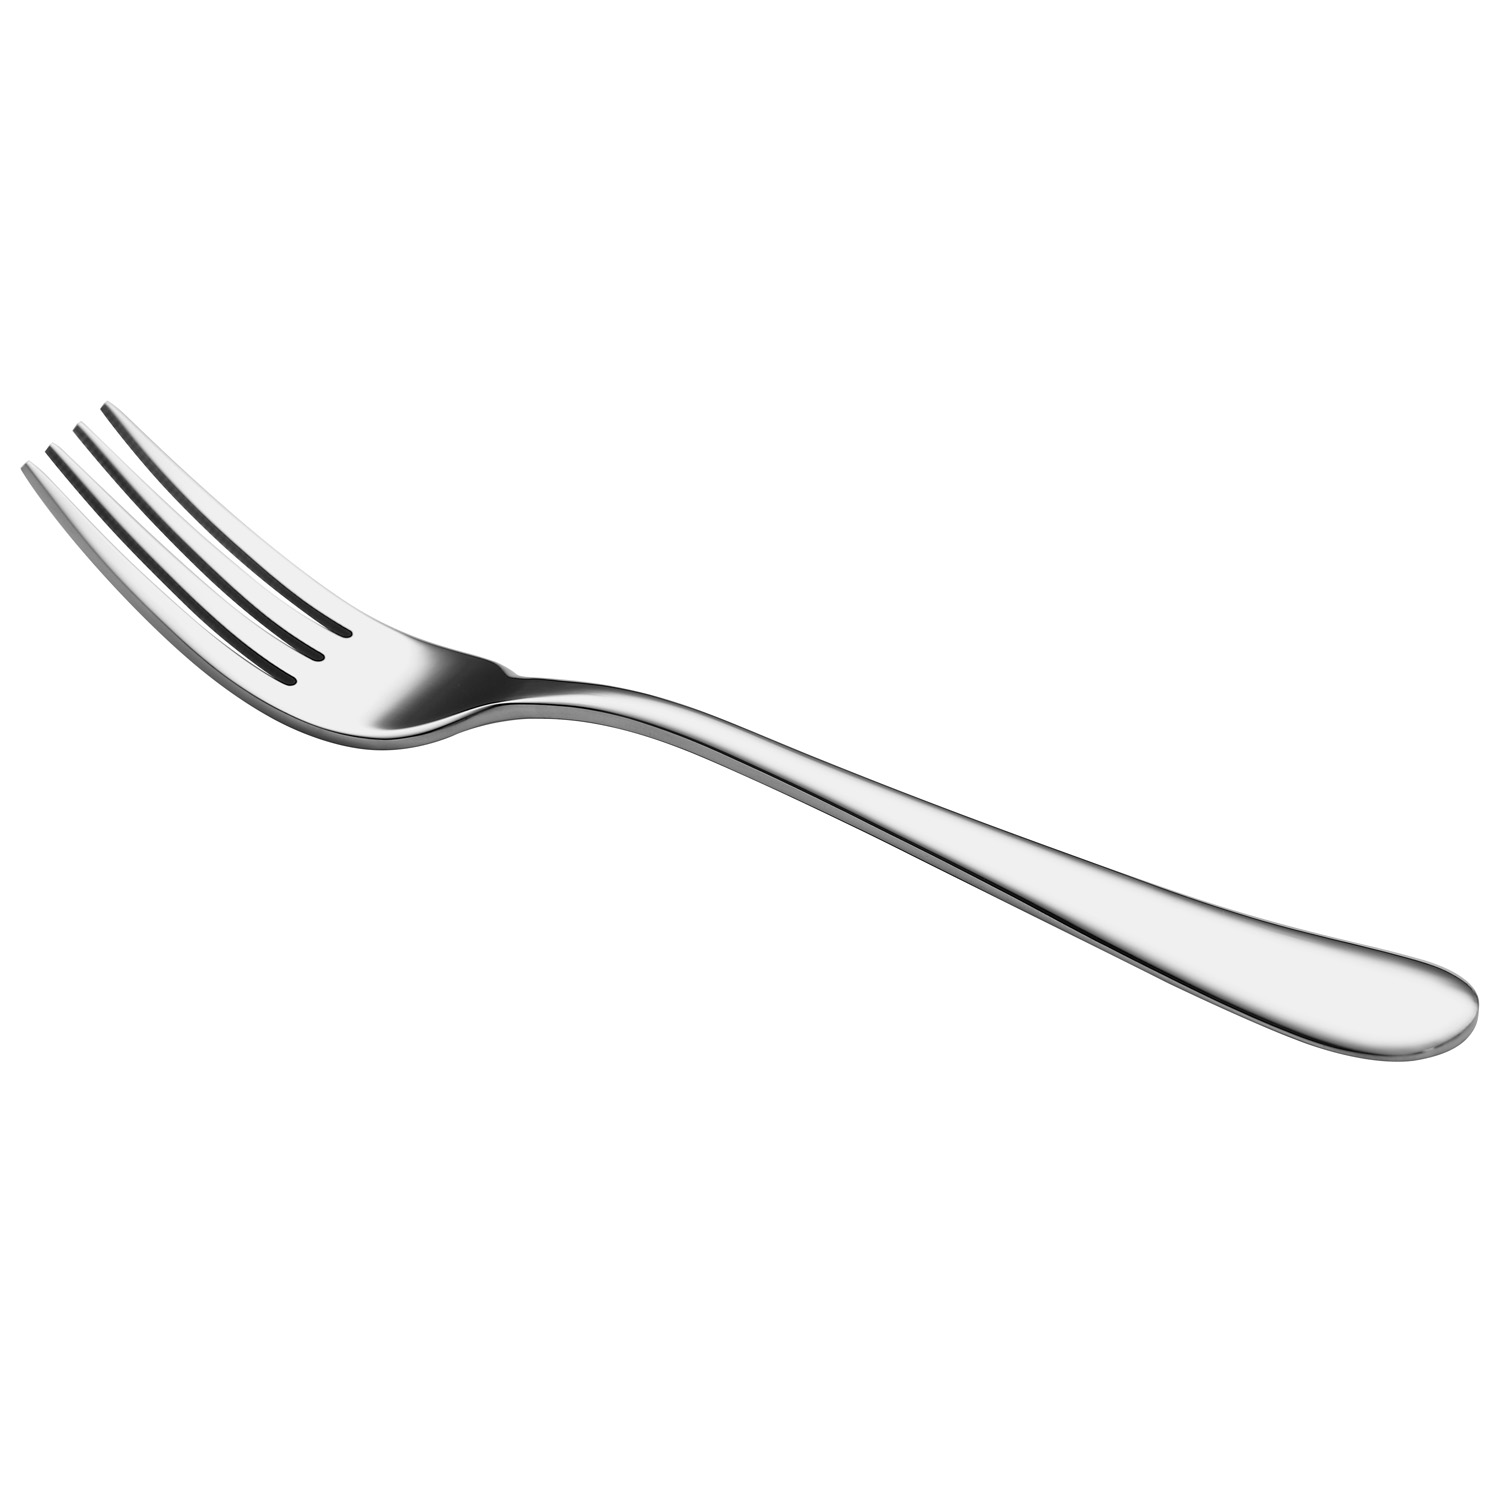 CAC China 8003-05 Noble Dinner Fork, Extra Heavy Weight 18/8, 7 3/8" - 1 dozen